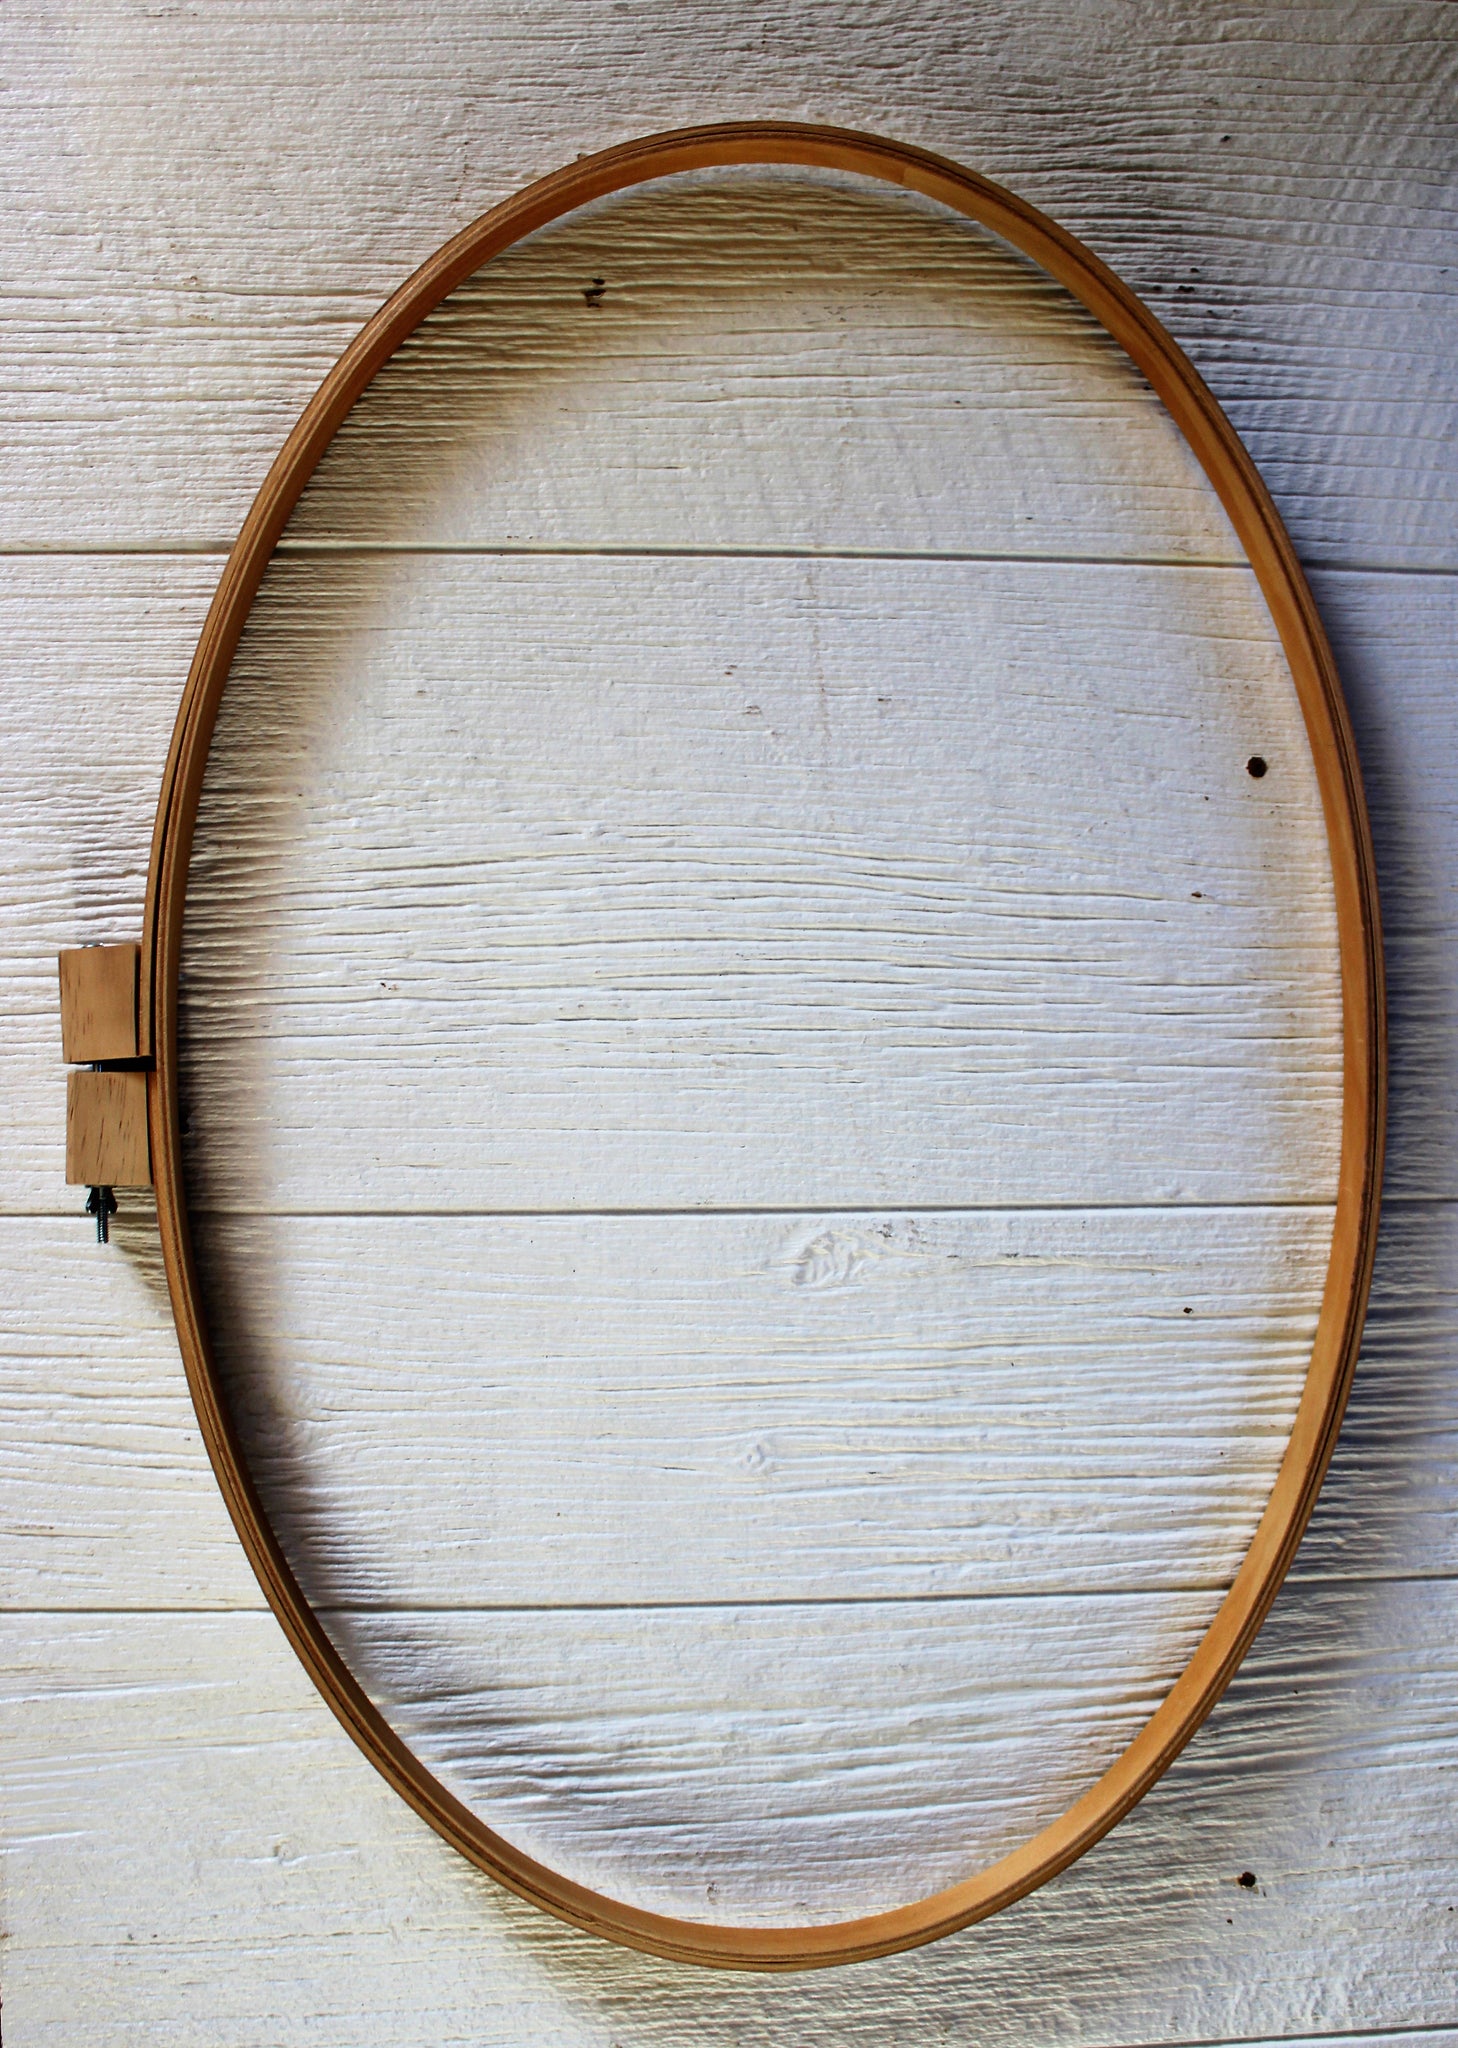 The Large Embroidery Hoop